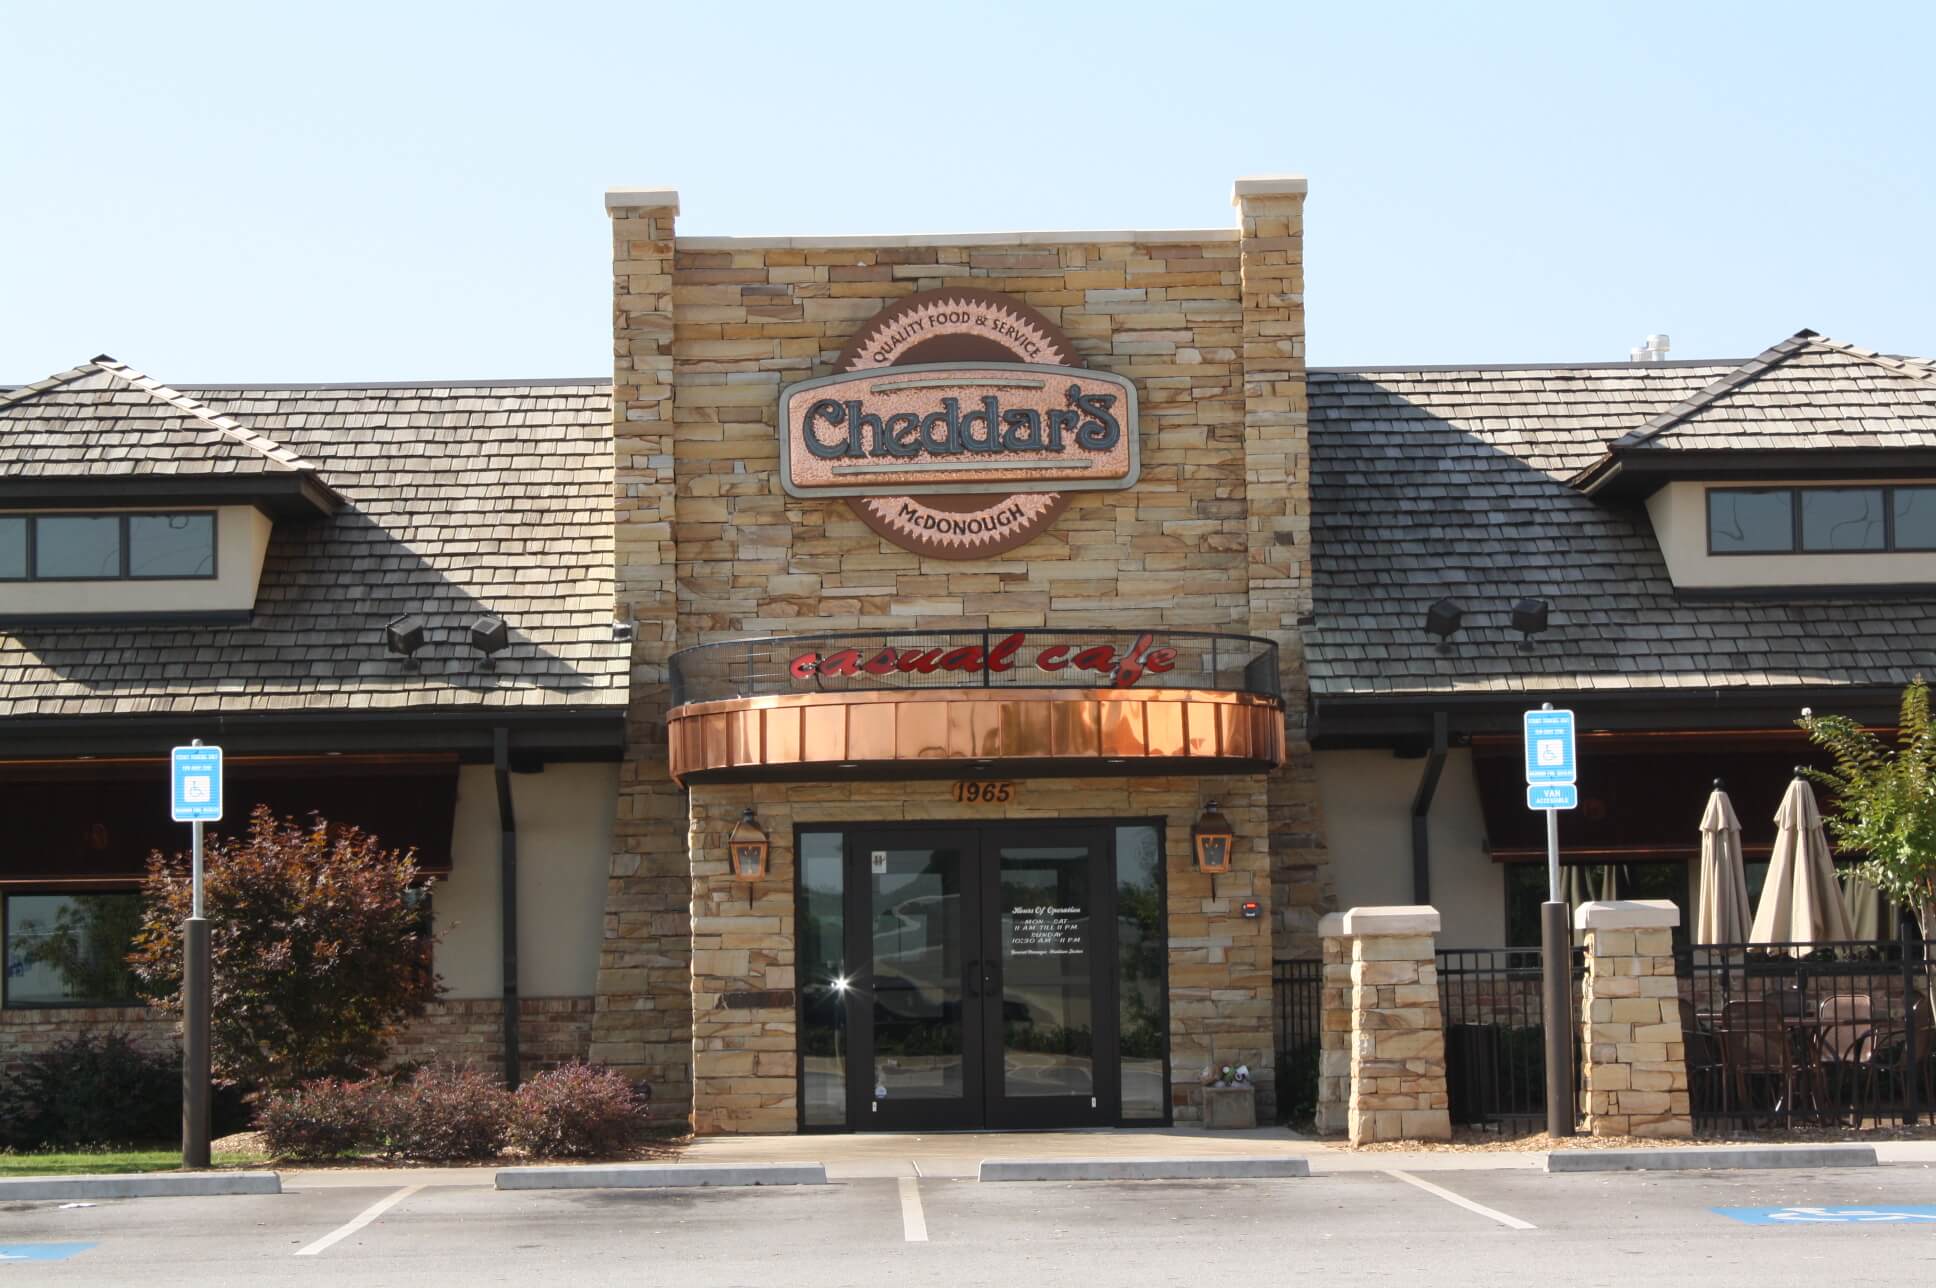 Cheddars menu prices featuring 79 items ranging from $1.49 to $19.99